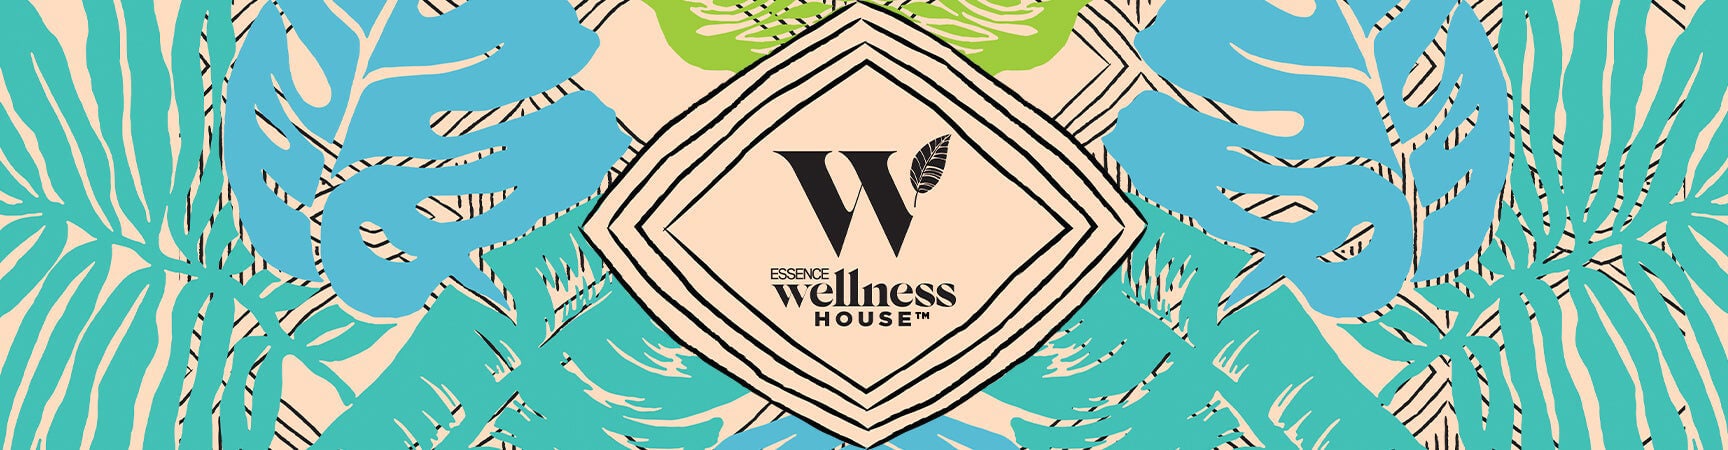 ESSENCE Wellness House: A List Of Over 20 Black Health & Wellness Experts Who Will Be In The Building